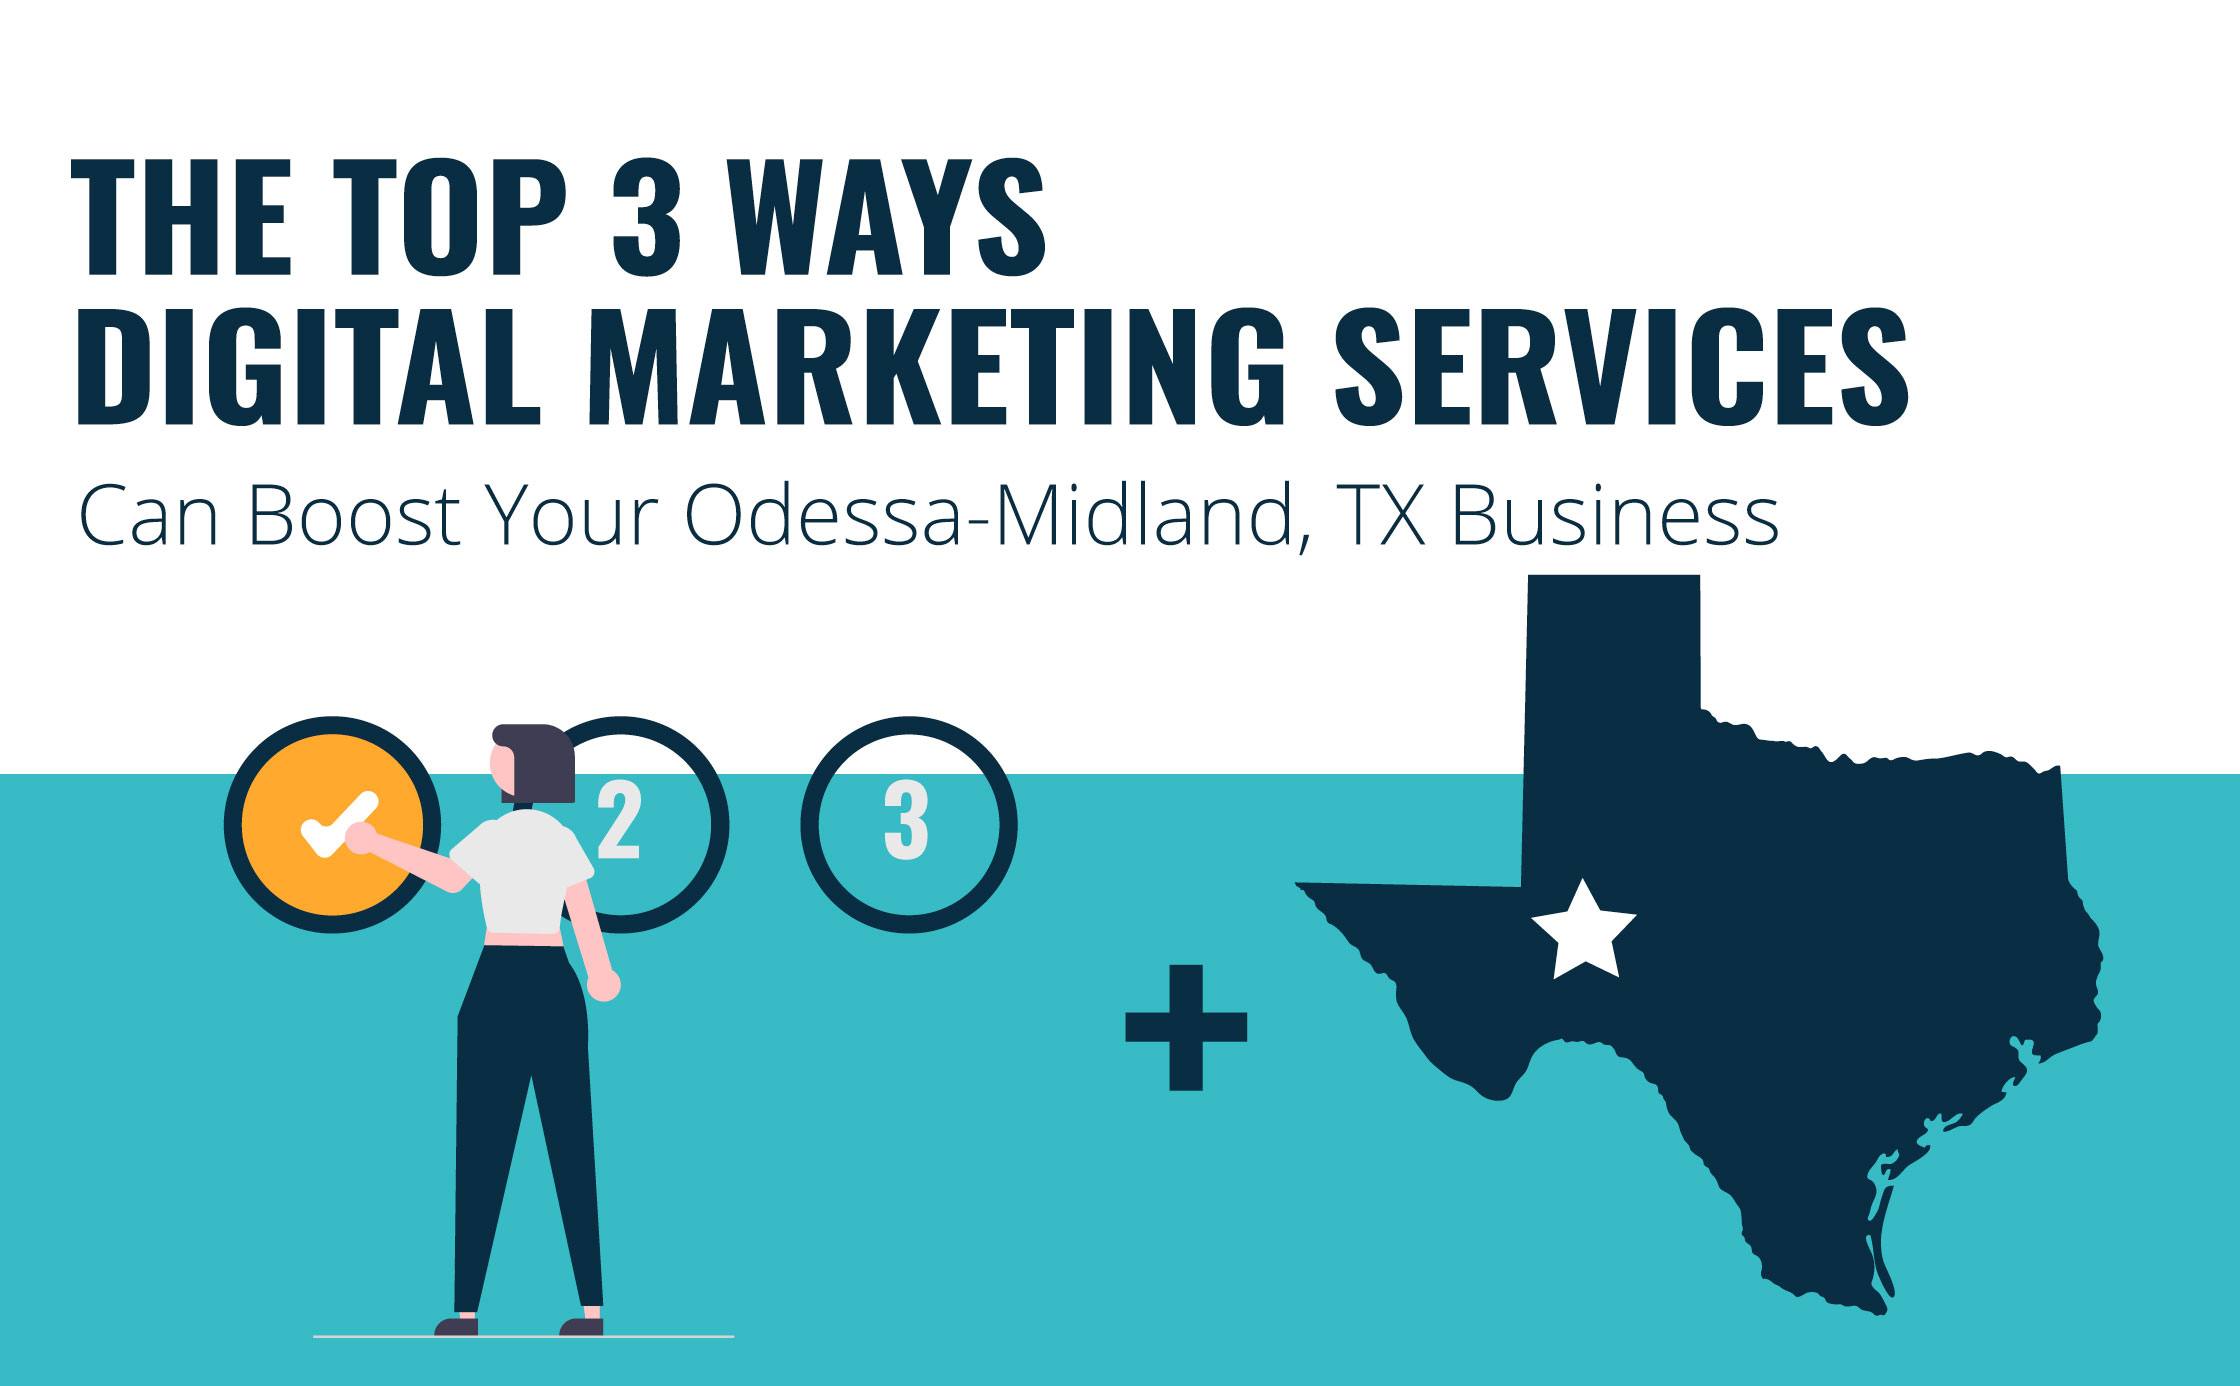 Top 3 Ways Digital Marketing Services Can Boost Your Odessa-Midland, TX Business